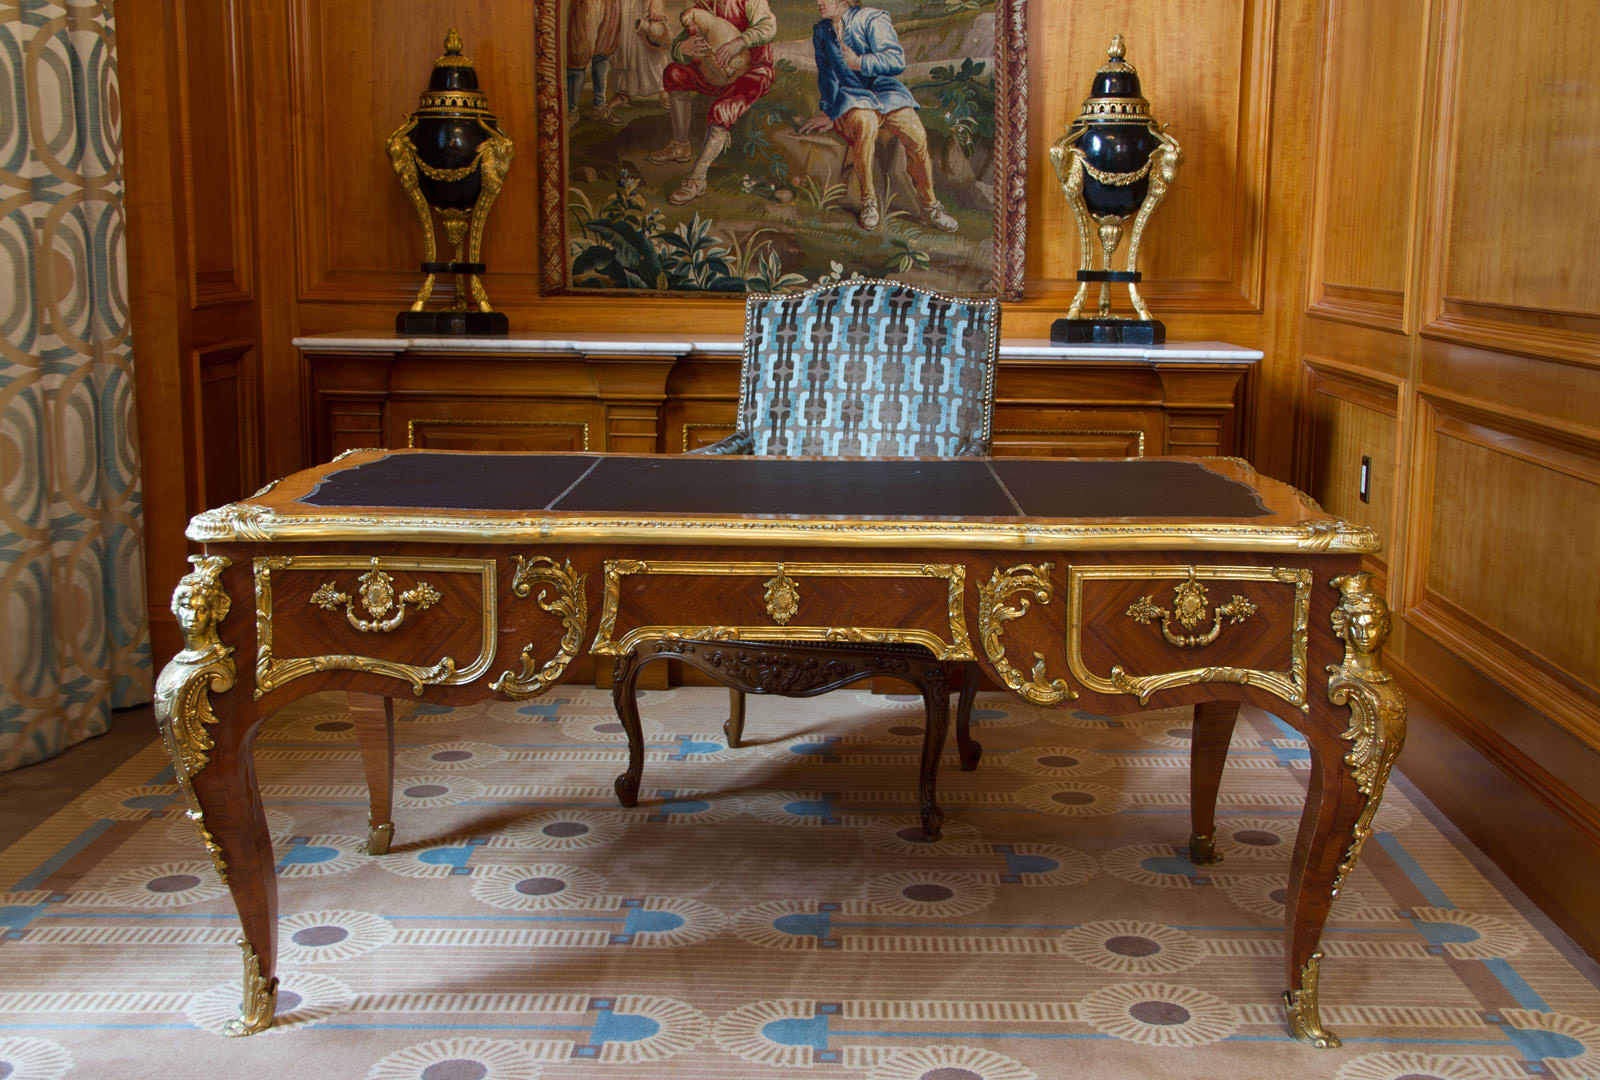 The Grand America Hotel's antique French desk with bronze trim and leather top